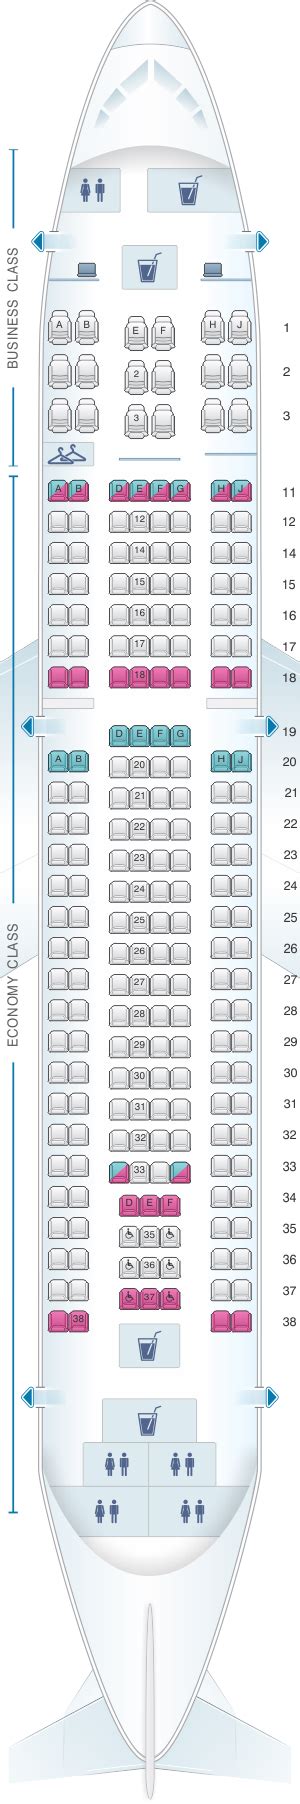 azores airlines seat selection